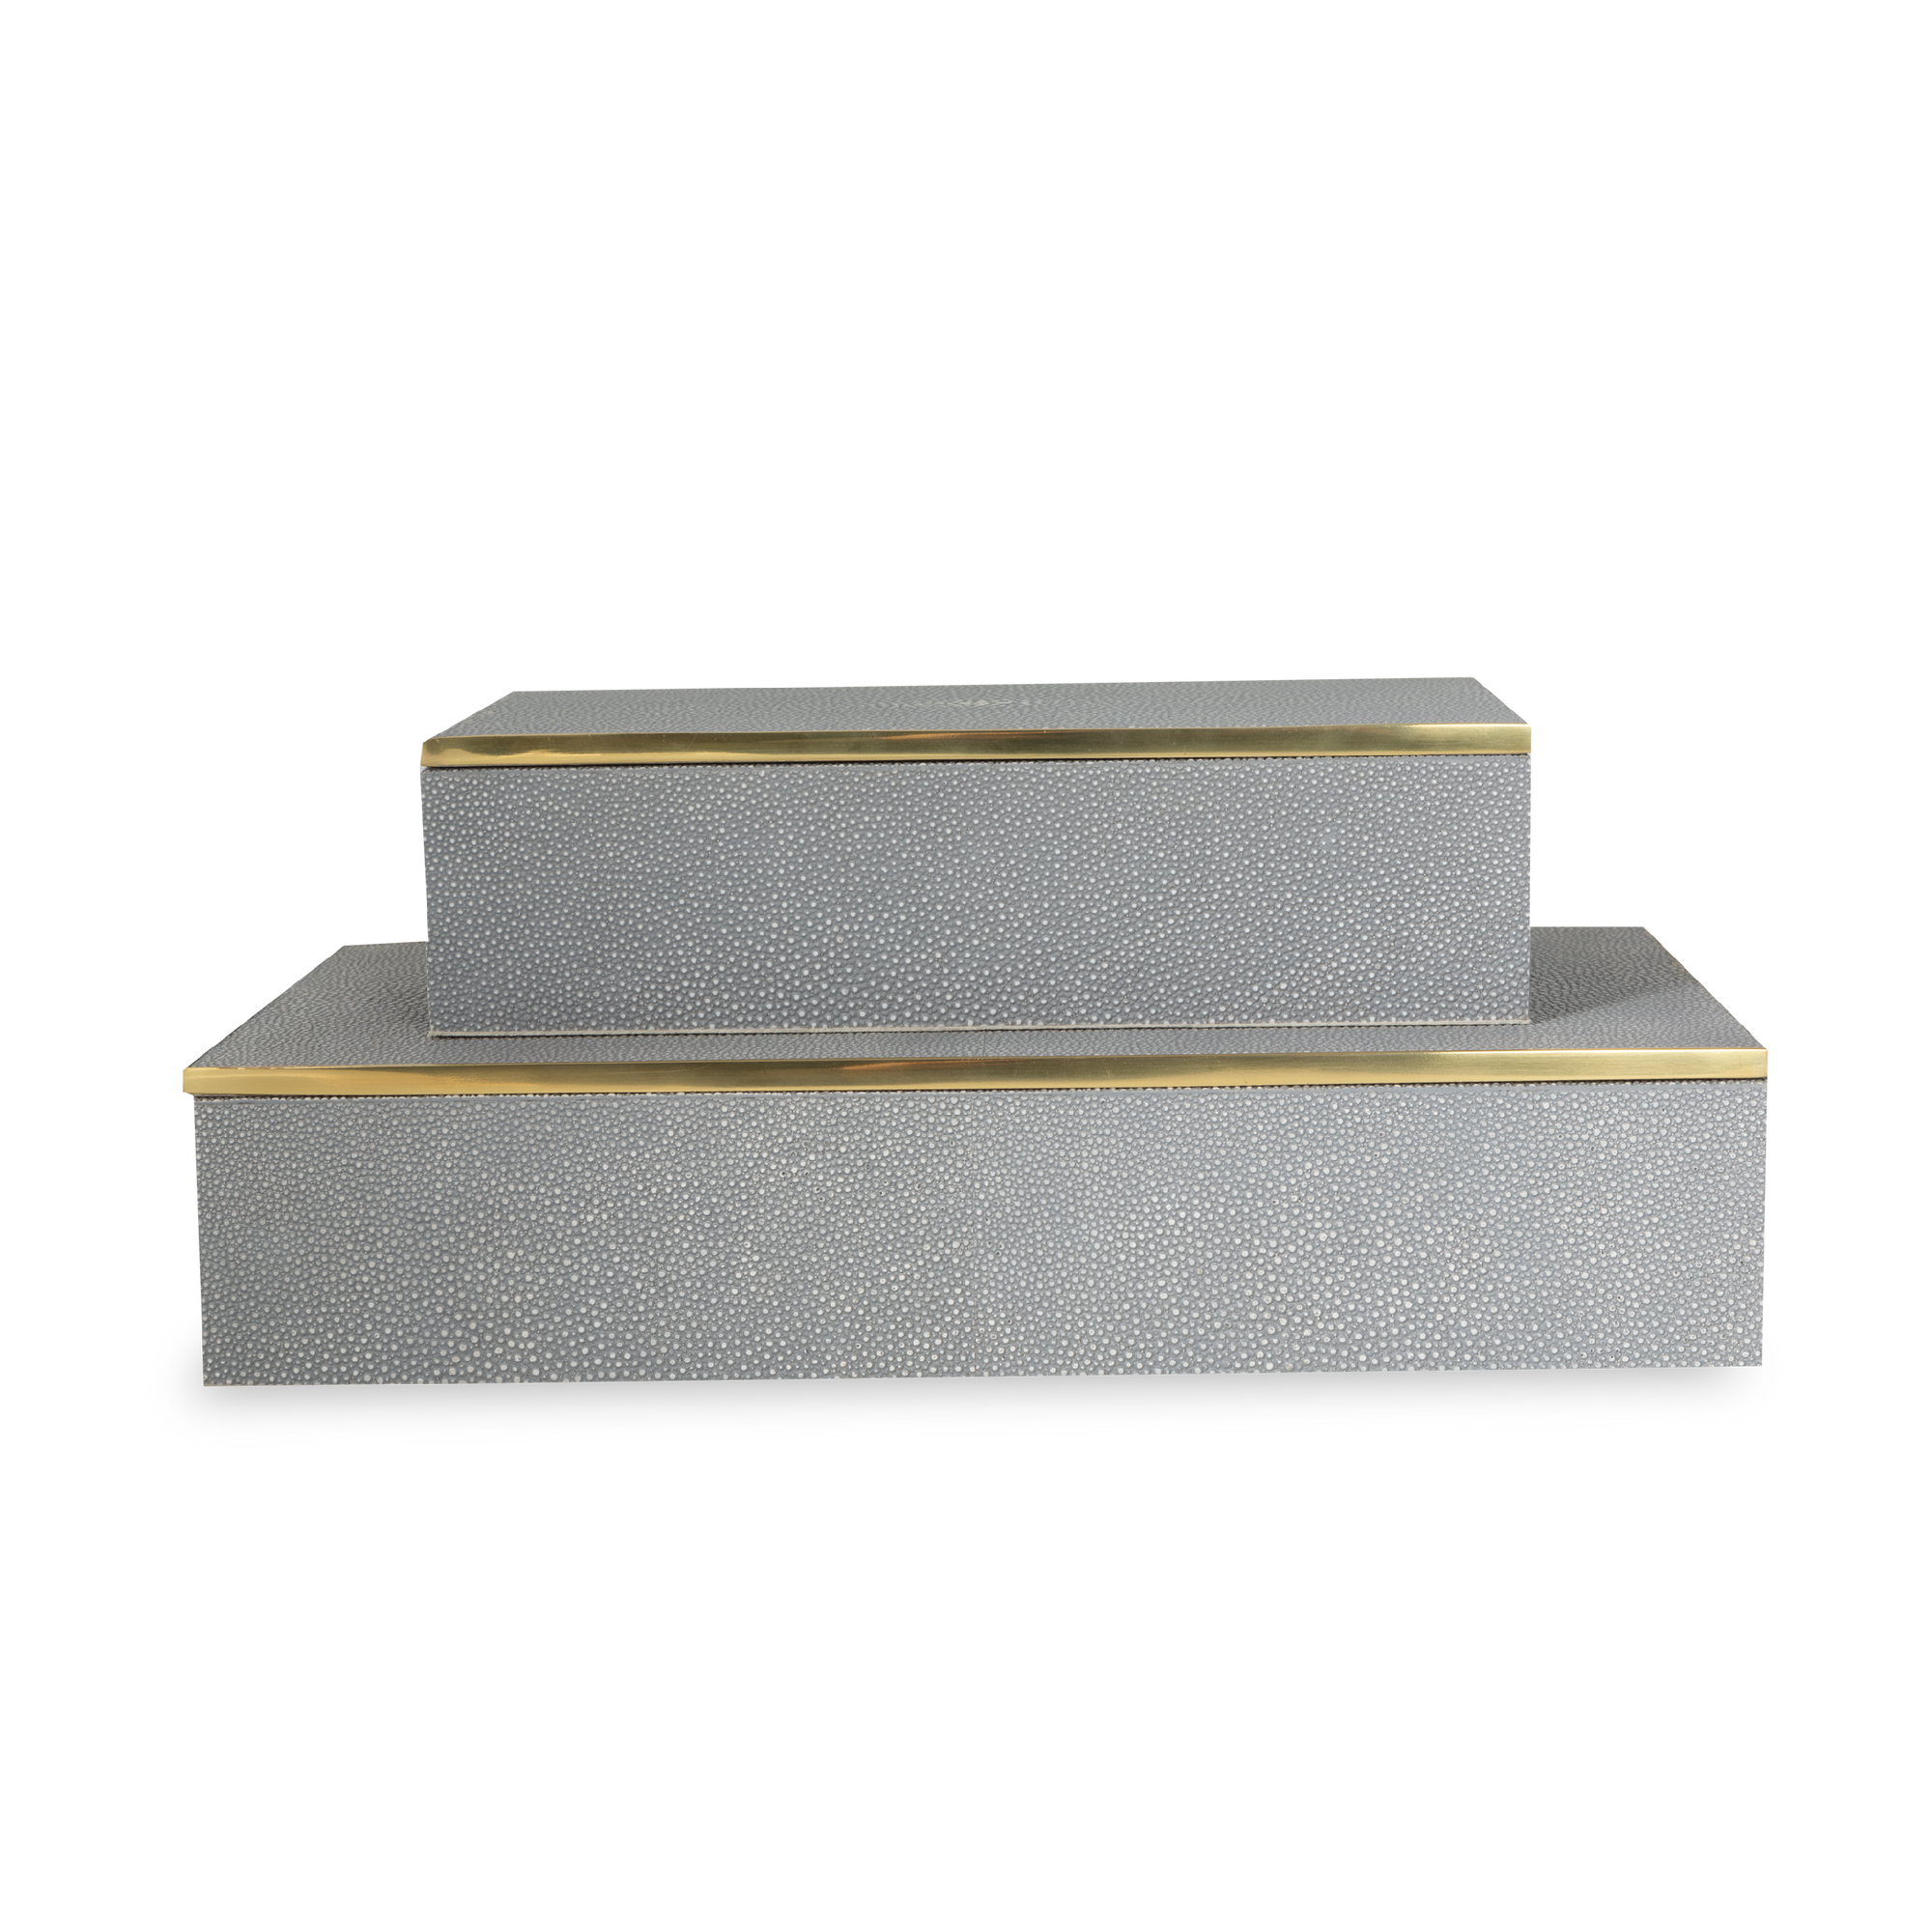 Stay organized with this box wrapped in luxurious shagreen with brass accents and velvet backing.